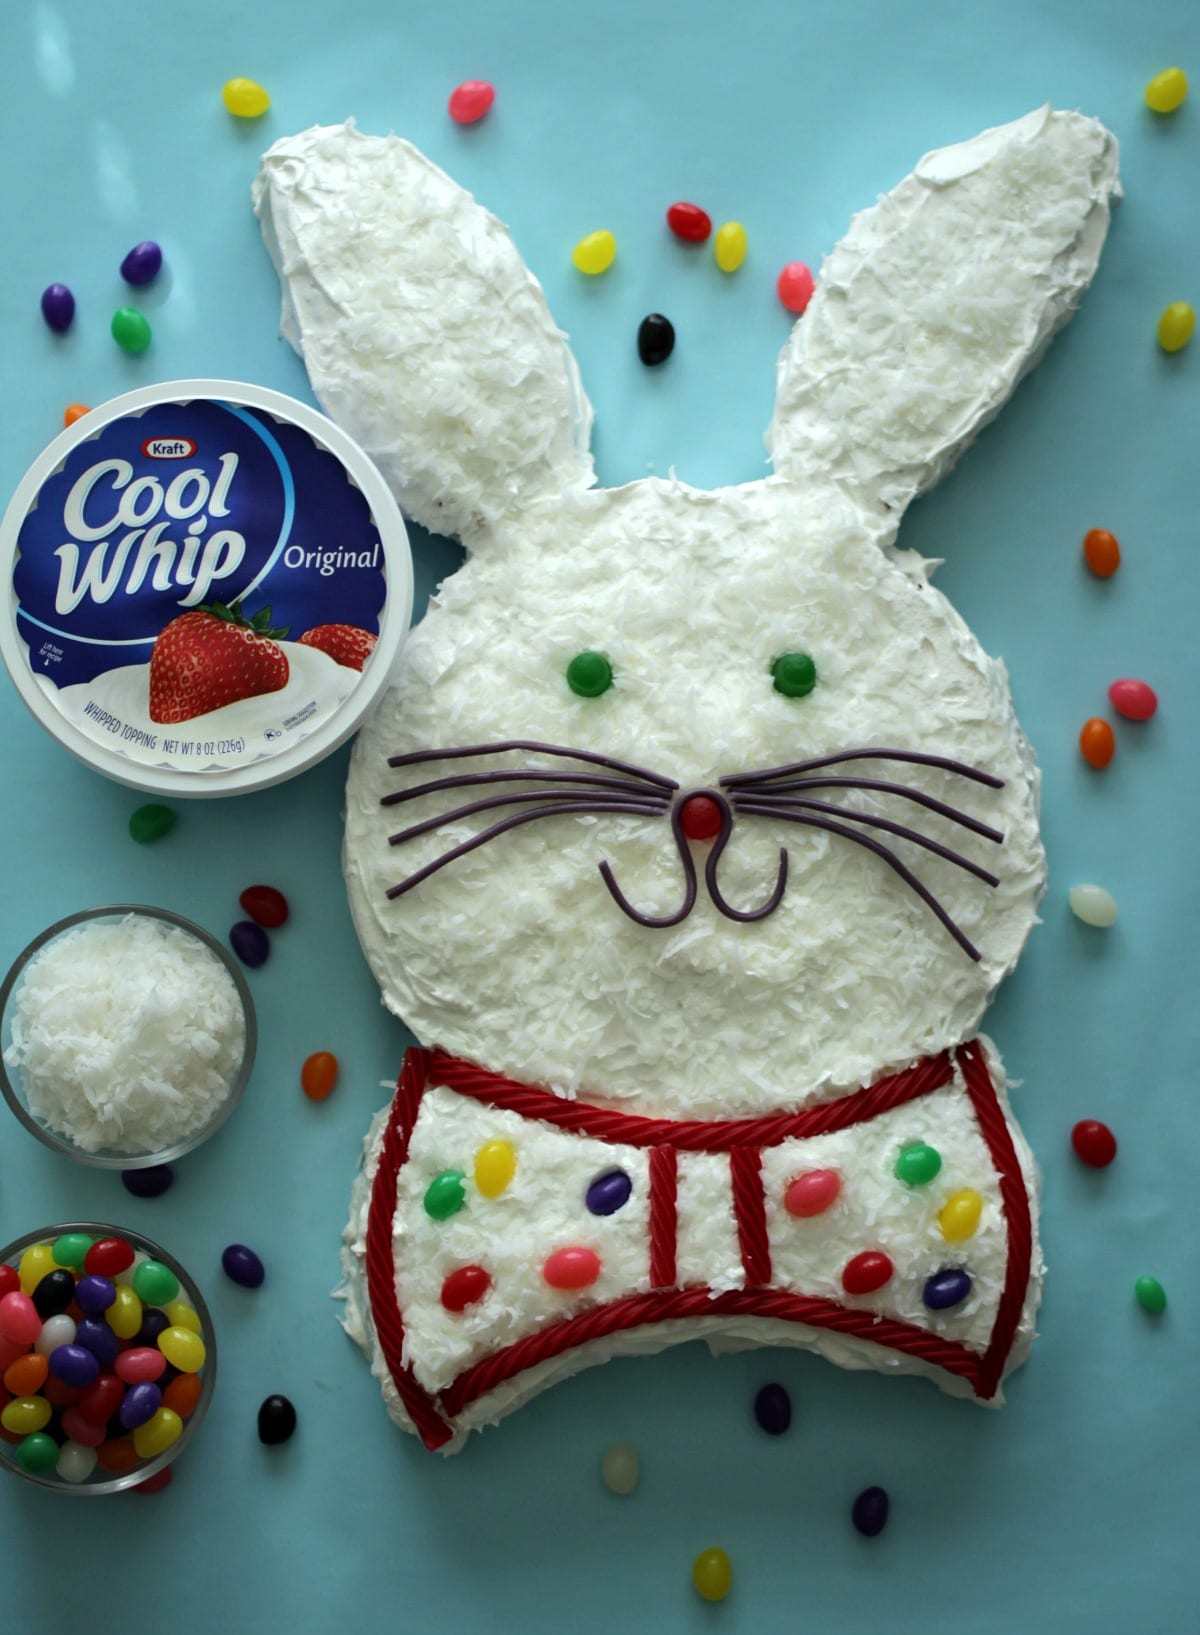 If you want to make an Easter dessert for your kids, co-workers, a party or just because, do I have the cake for you. This Bunny Cake from Kraft is guaranteed to put a smile on everyone’s face. I mean, just look at it!